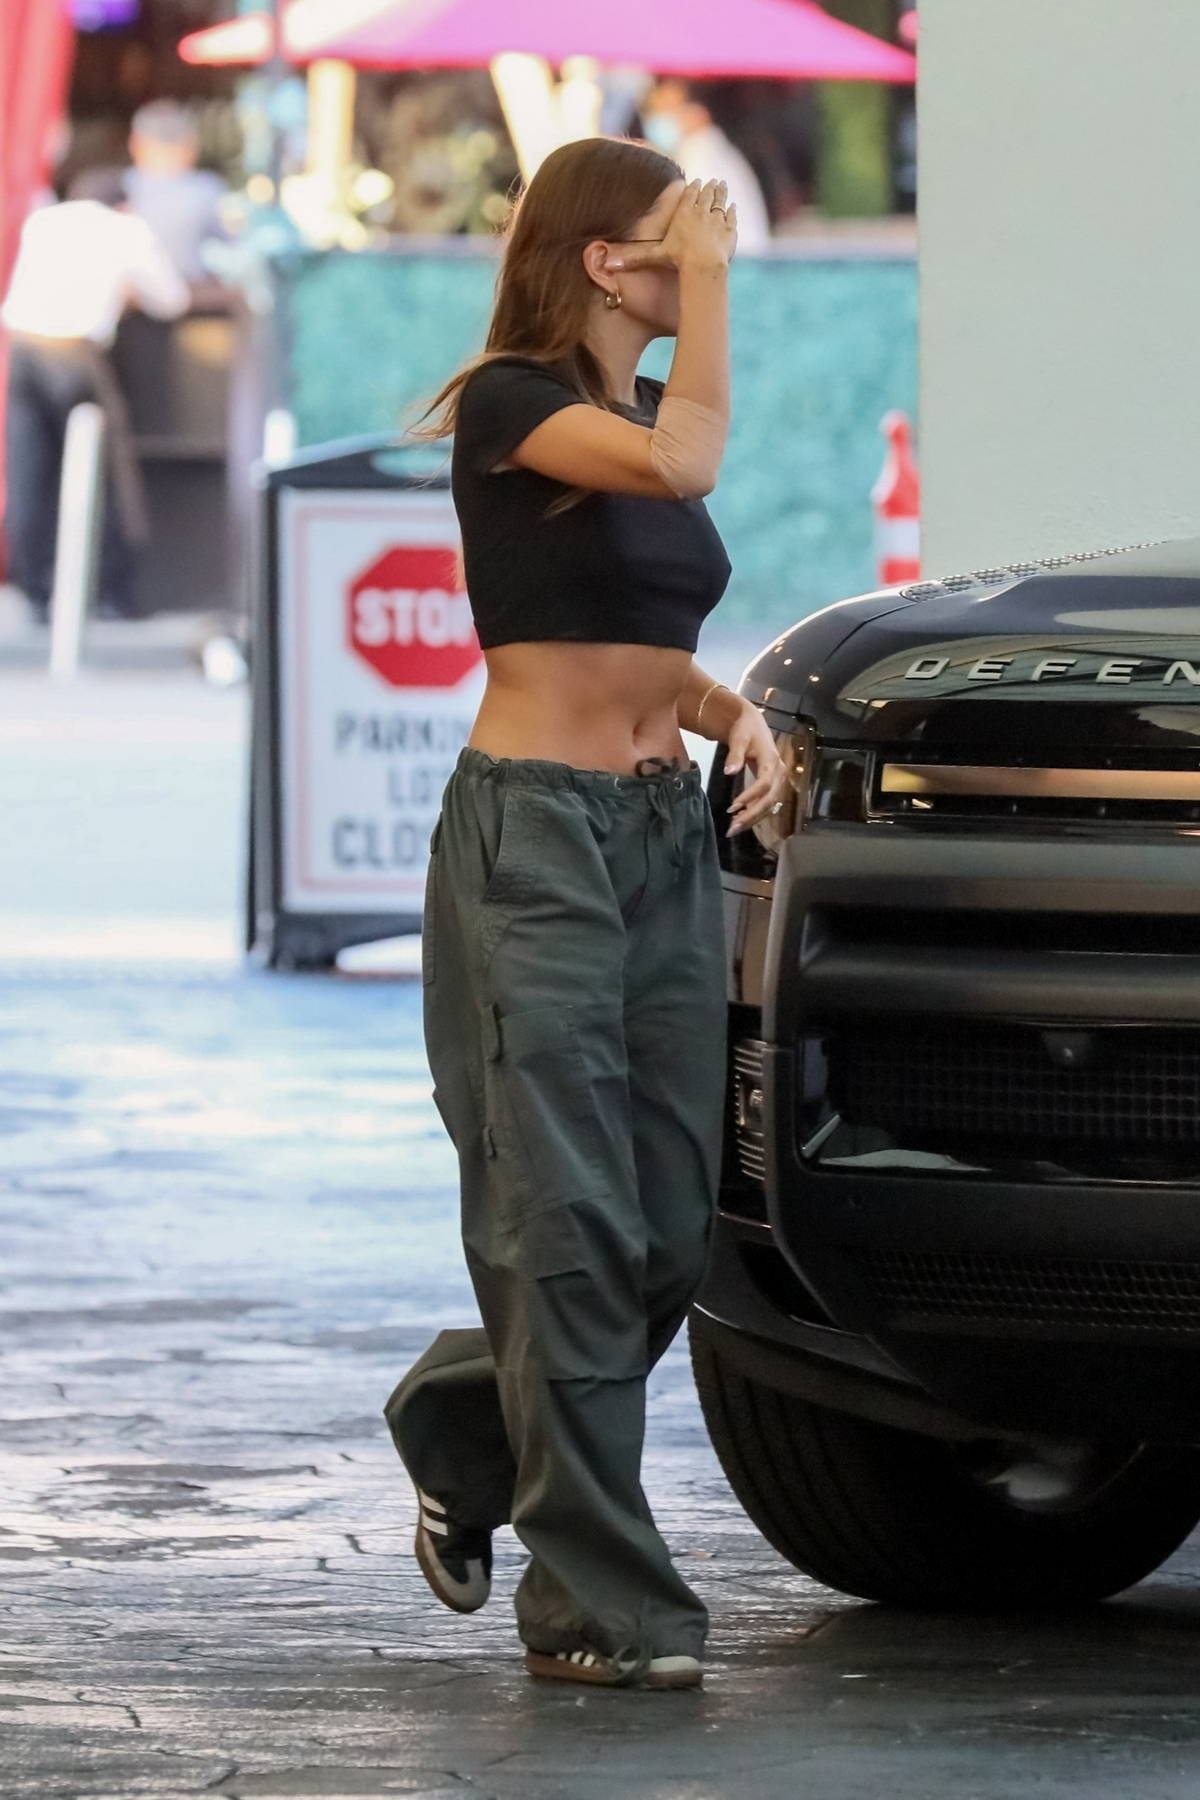 Hailey Bieber Rocks A White Crop Top & Baggy Jeans During New